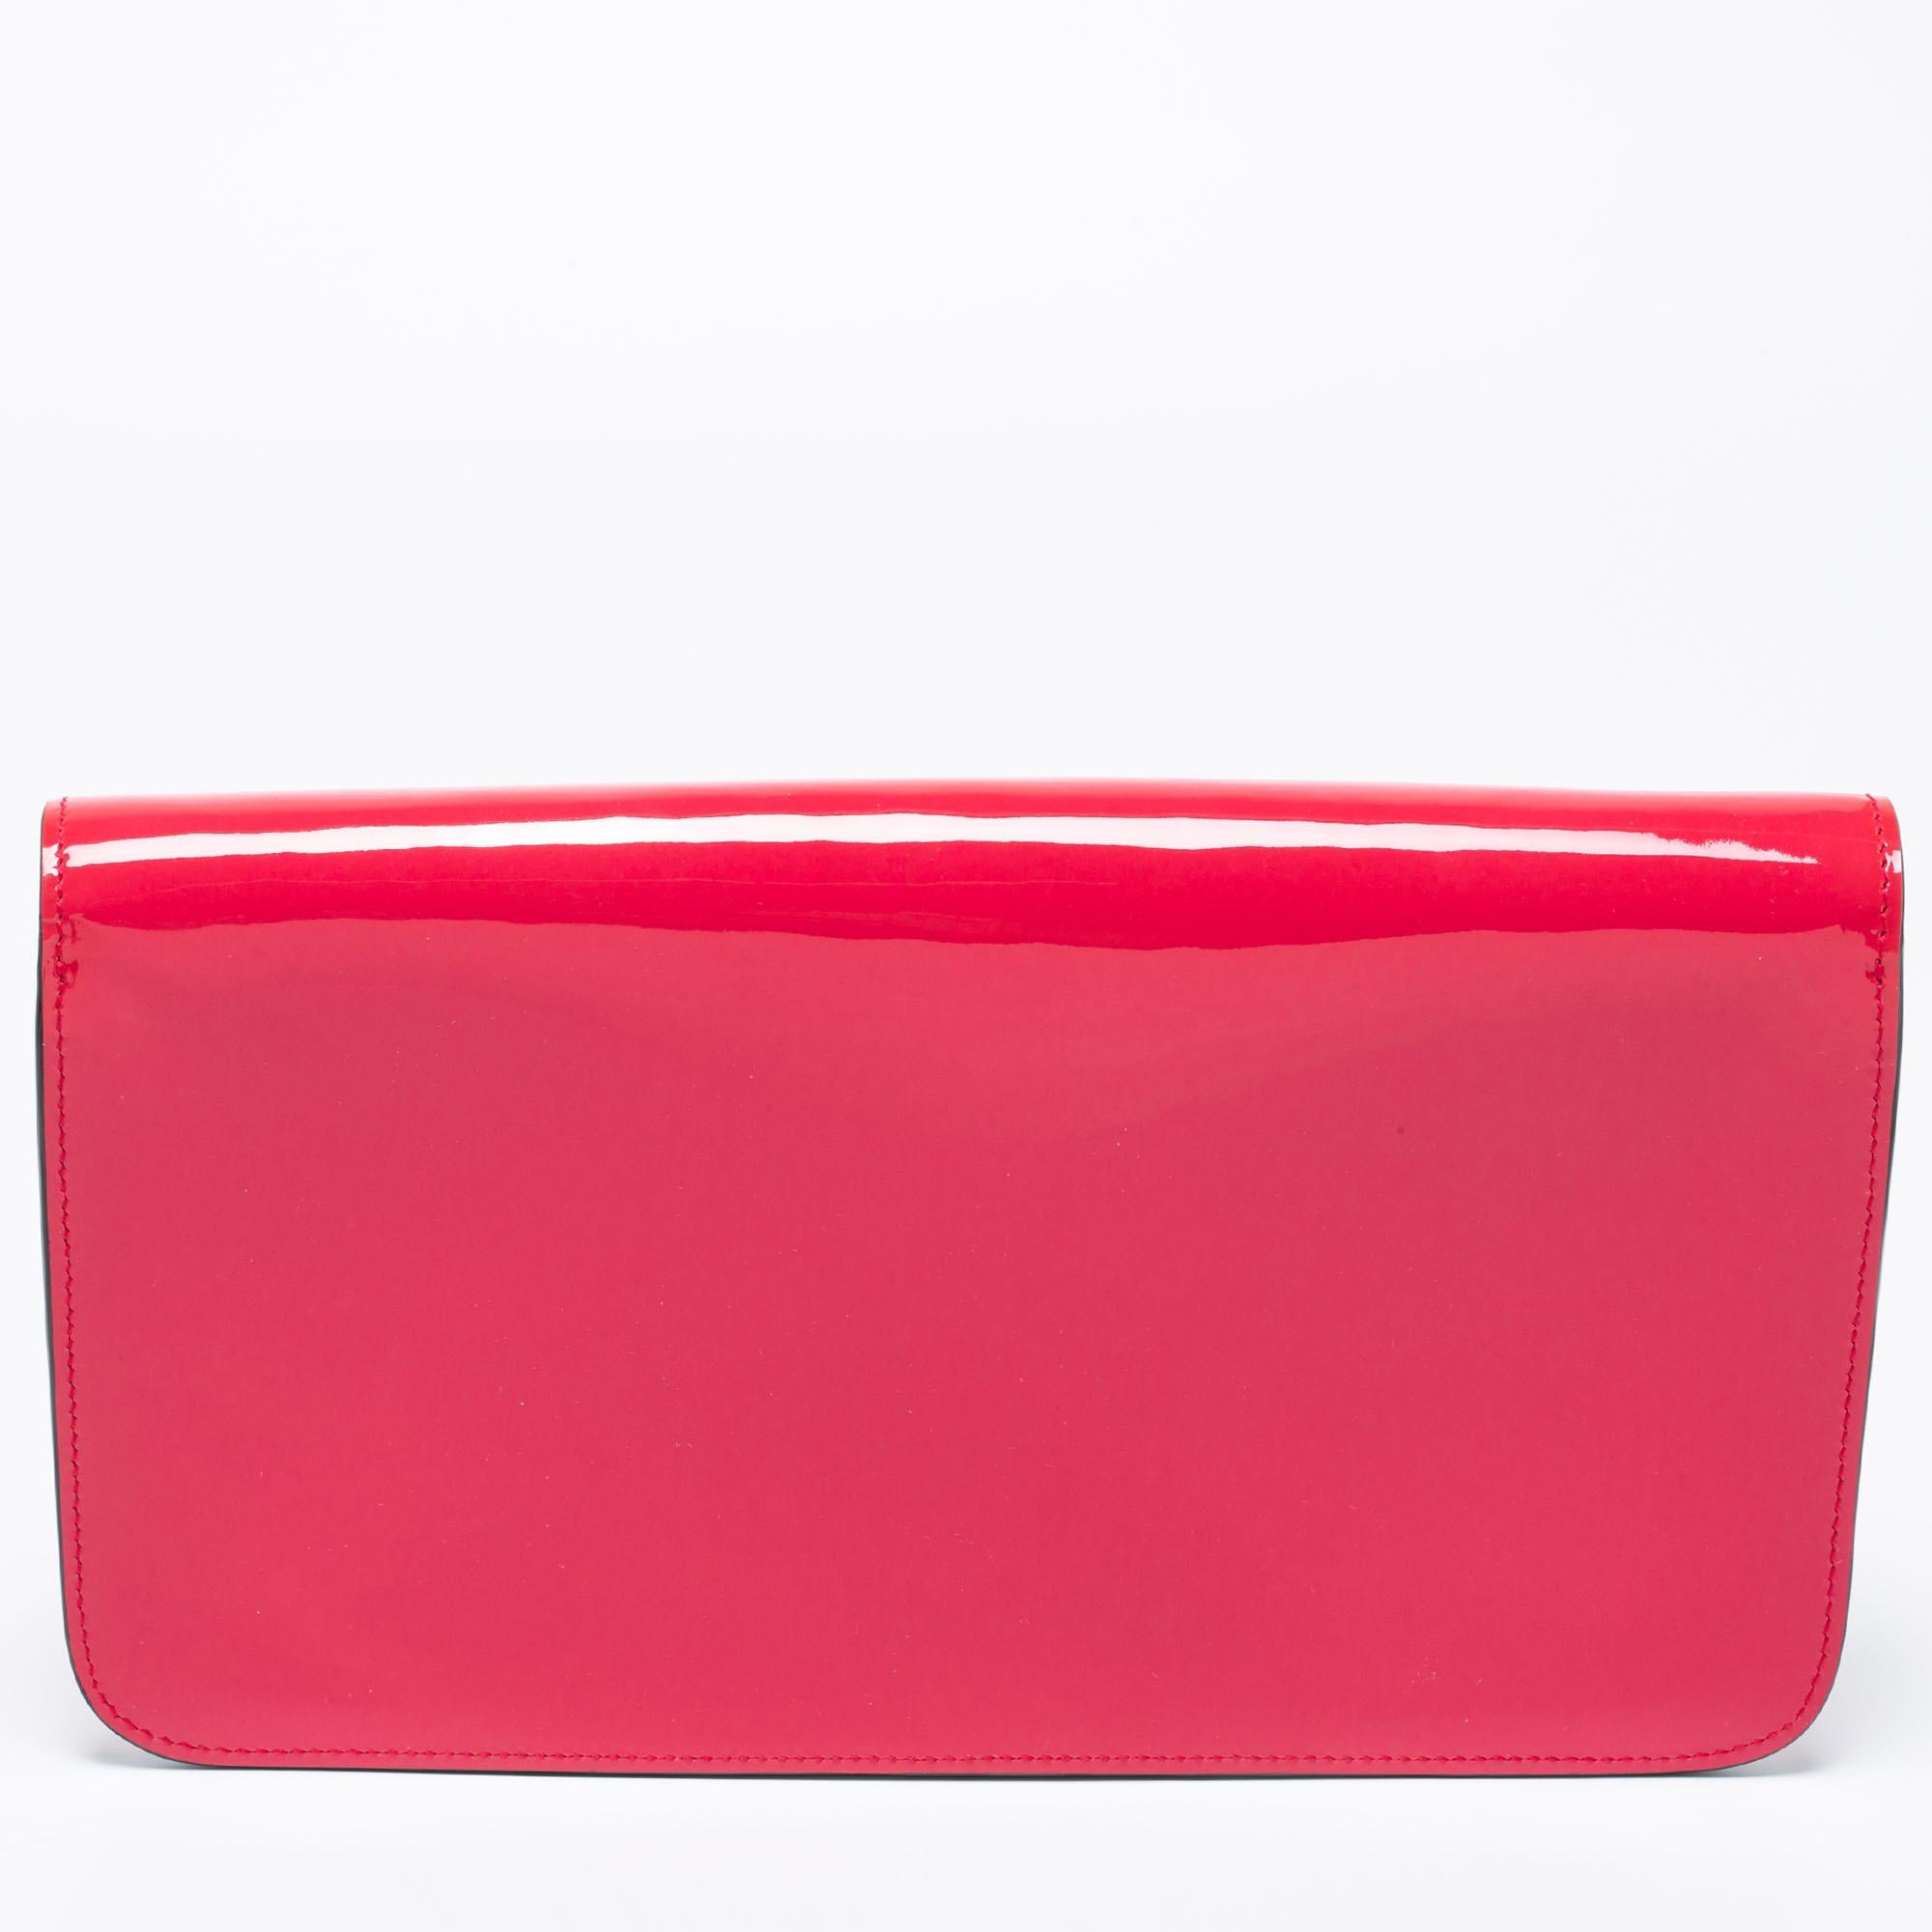 Gucci brings you yet another gorgeous accessory with this clutch. It has been carefully crafted from patent leather into a simple rectangular shape. The front flap featuring the signature Horsebit opens to reveal a suede interior for your